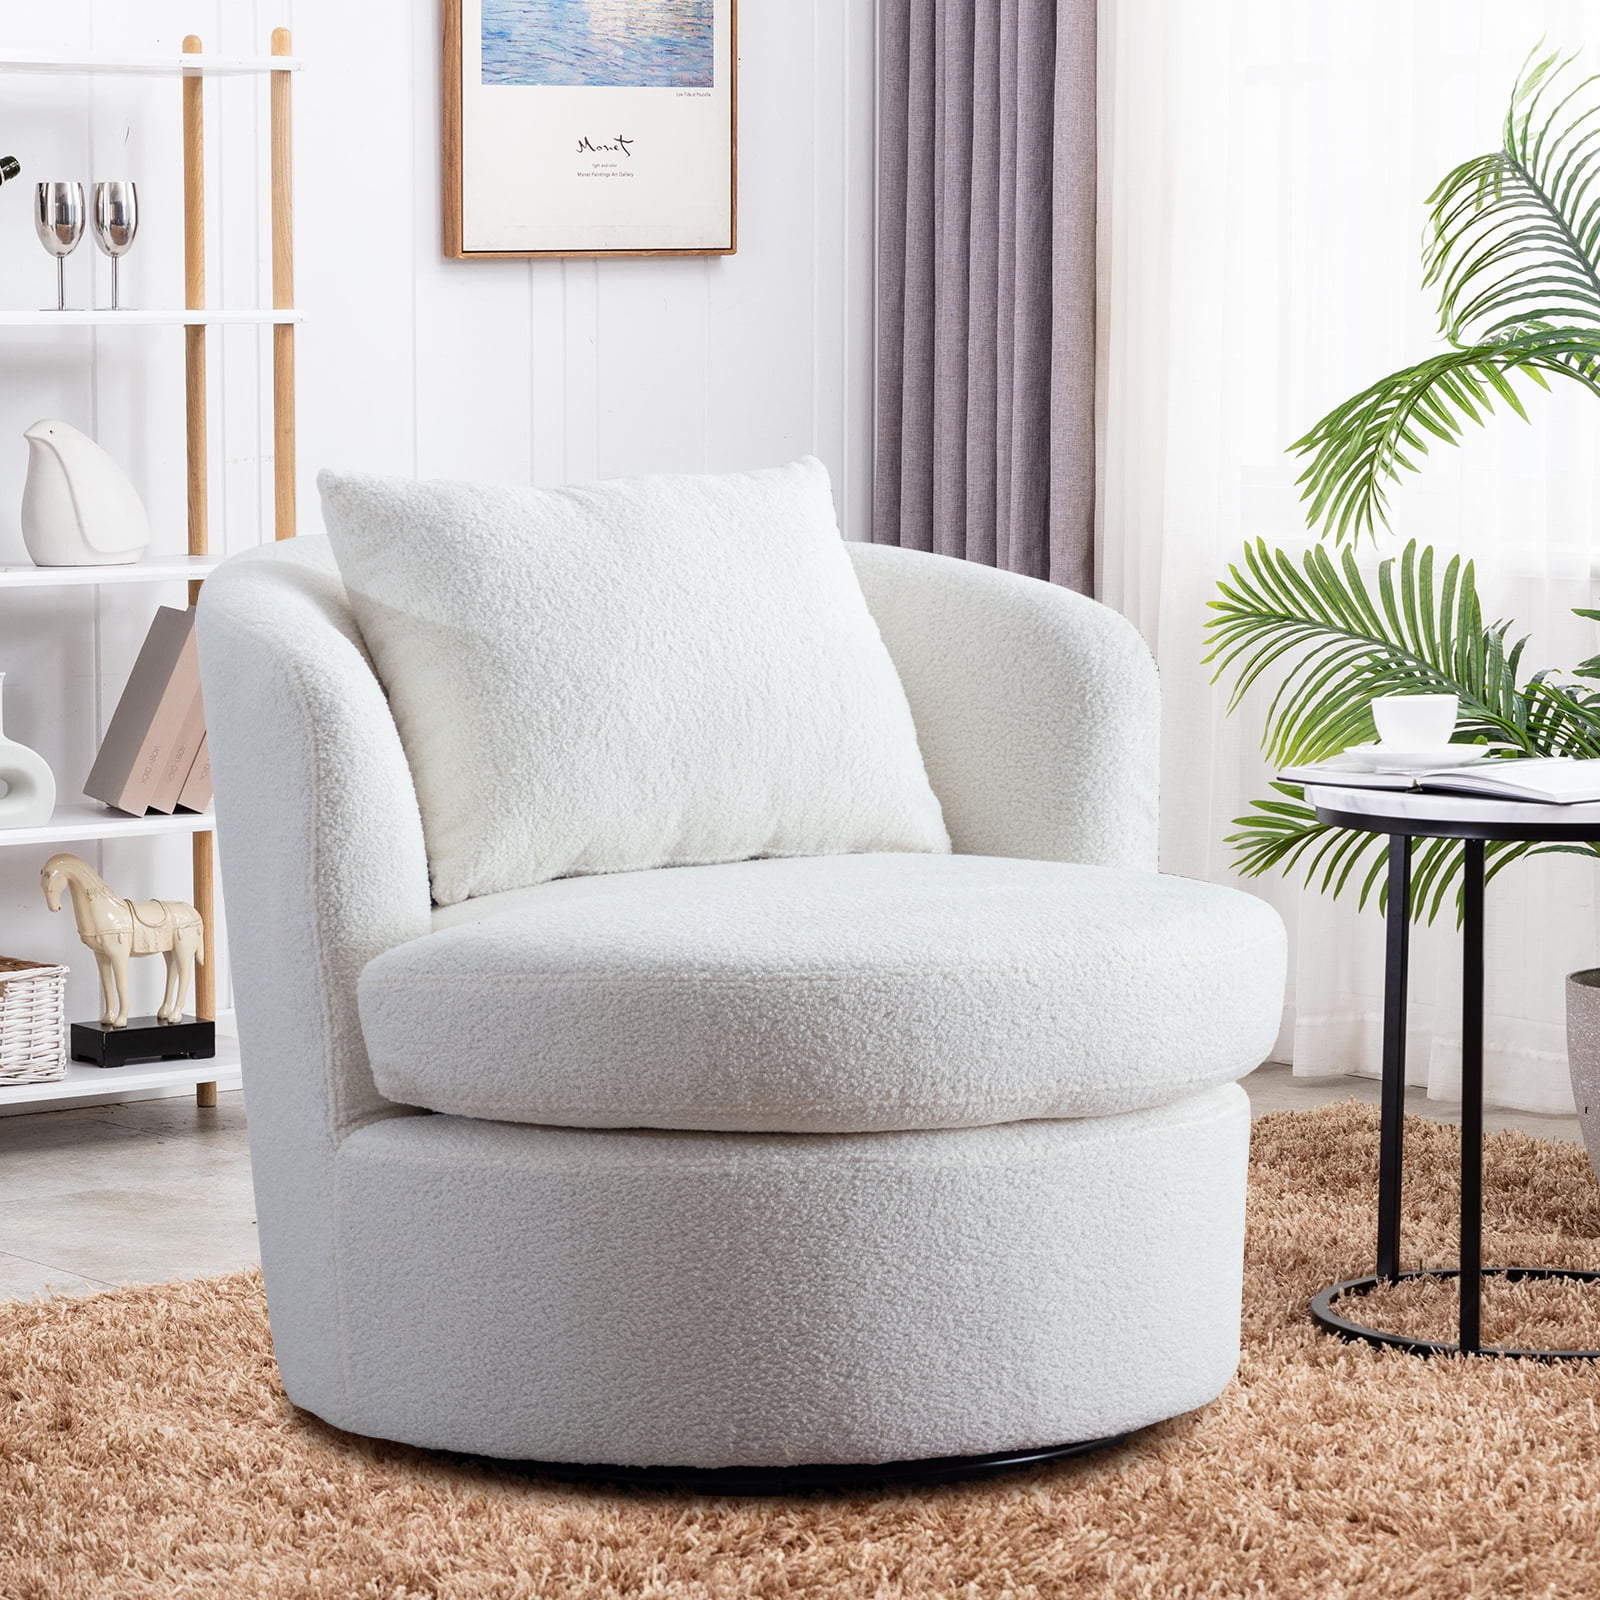 Ebello Swivel Accent Chair with Lamb Wool Fabric for Adult, Plump ...